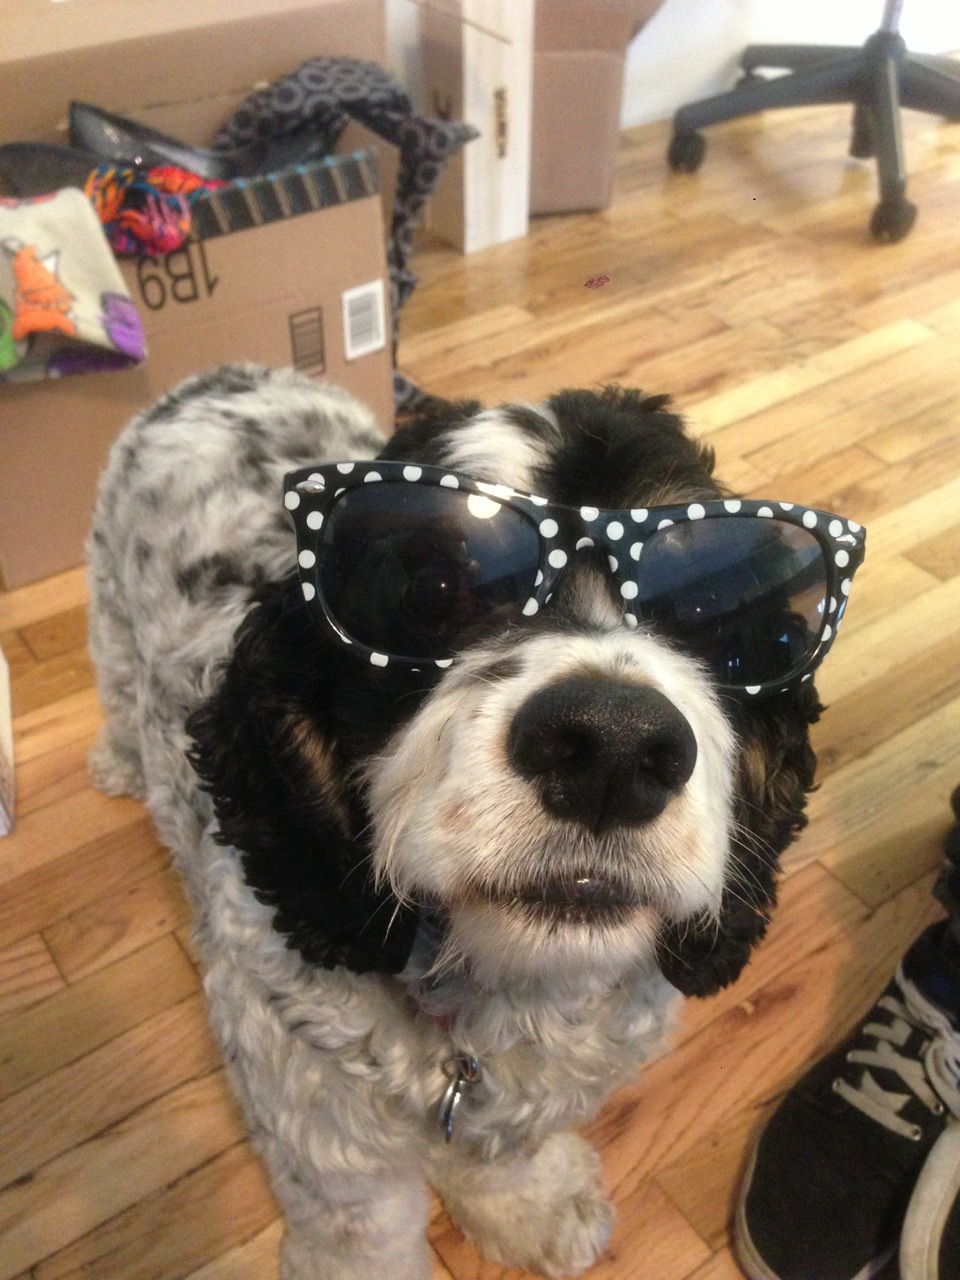 strle:
“ Woodythedog lookin gooooooood
”
Decided to rock out today with something from my Elton John Collection.